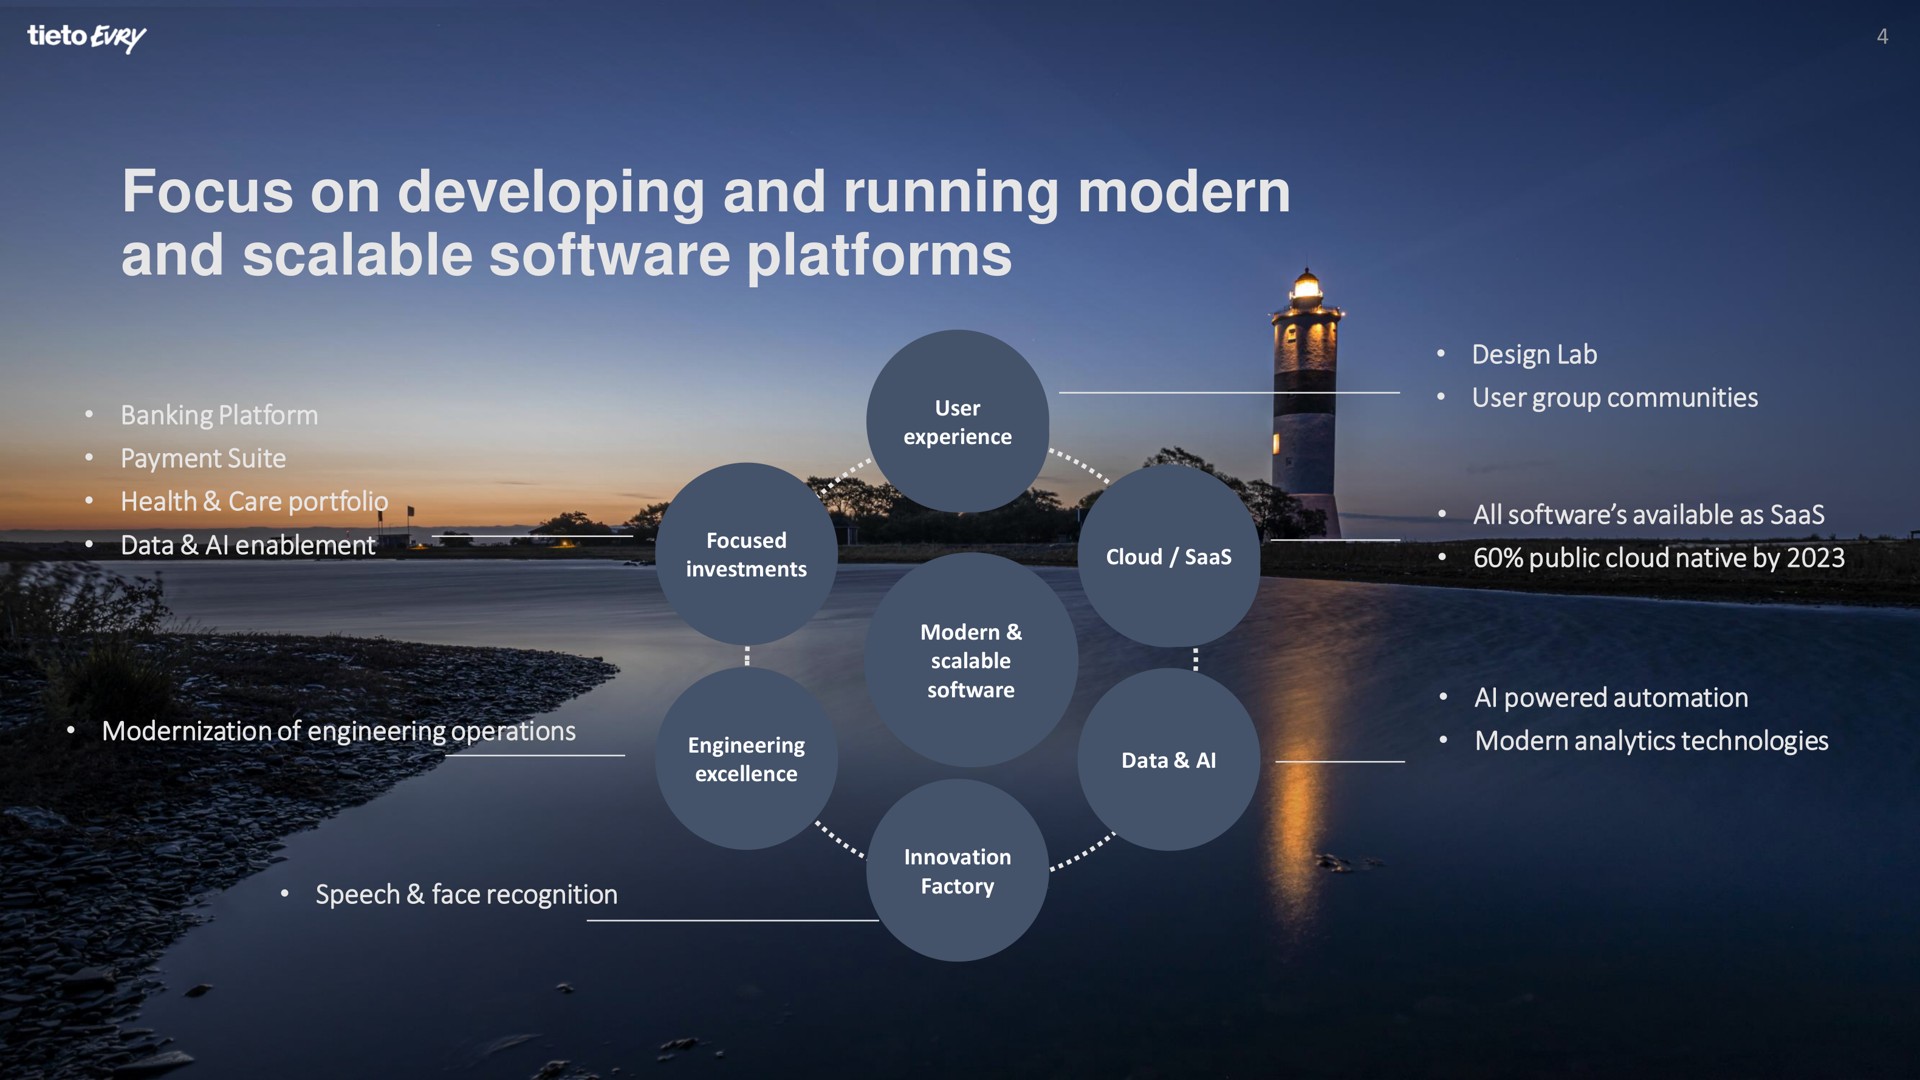 focus on developing and running modern and scalable platforms | Tietoevry